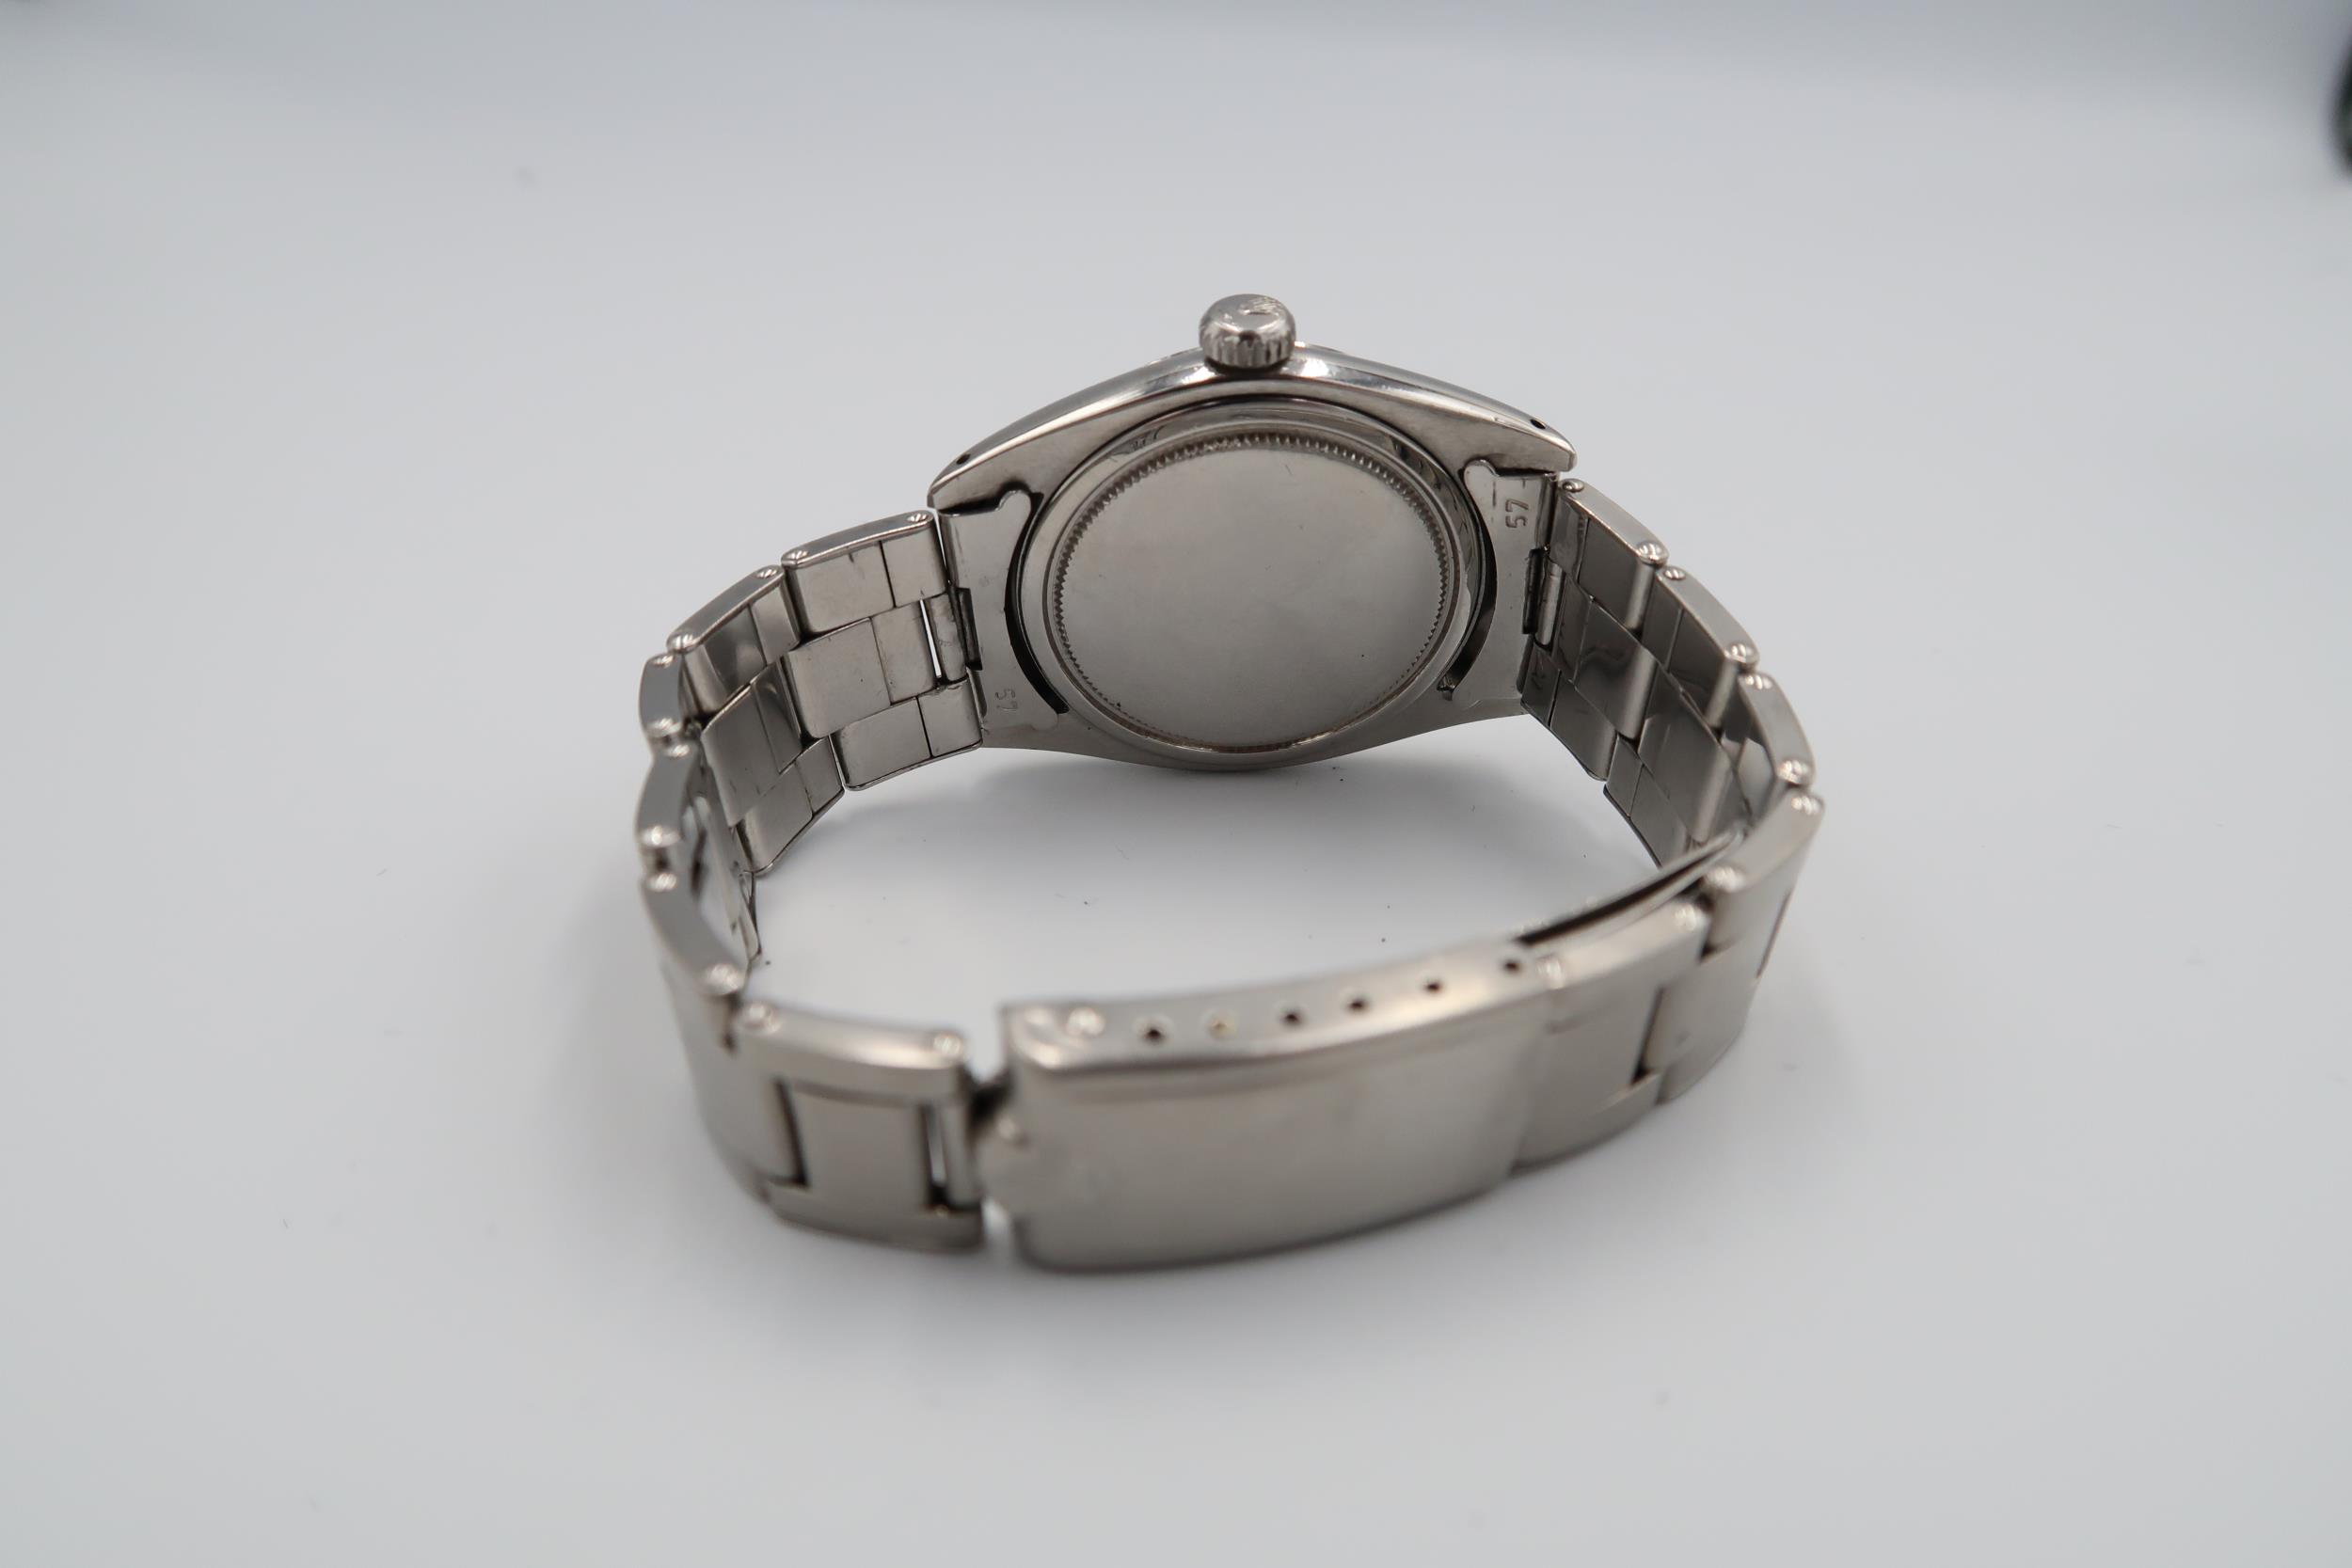 An early Gents steel cased Rolex Oyster precision wristwatch - diameter 35mm not including screw - Image 5 of 5